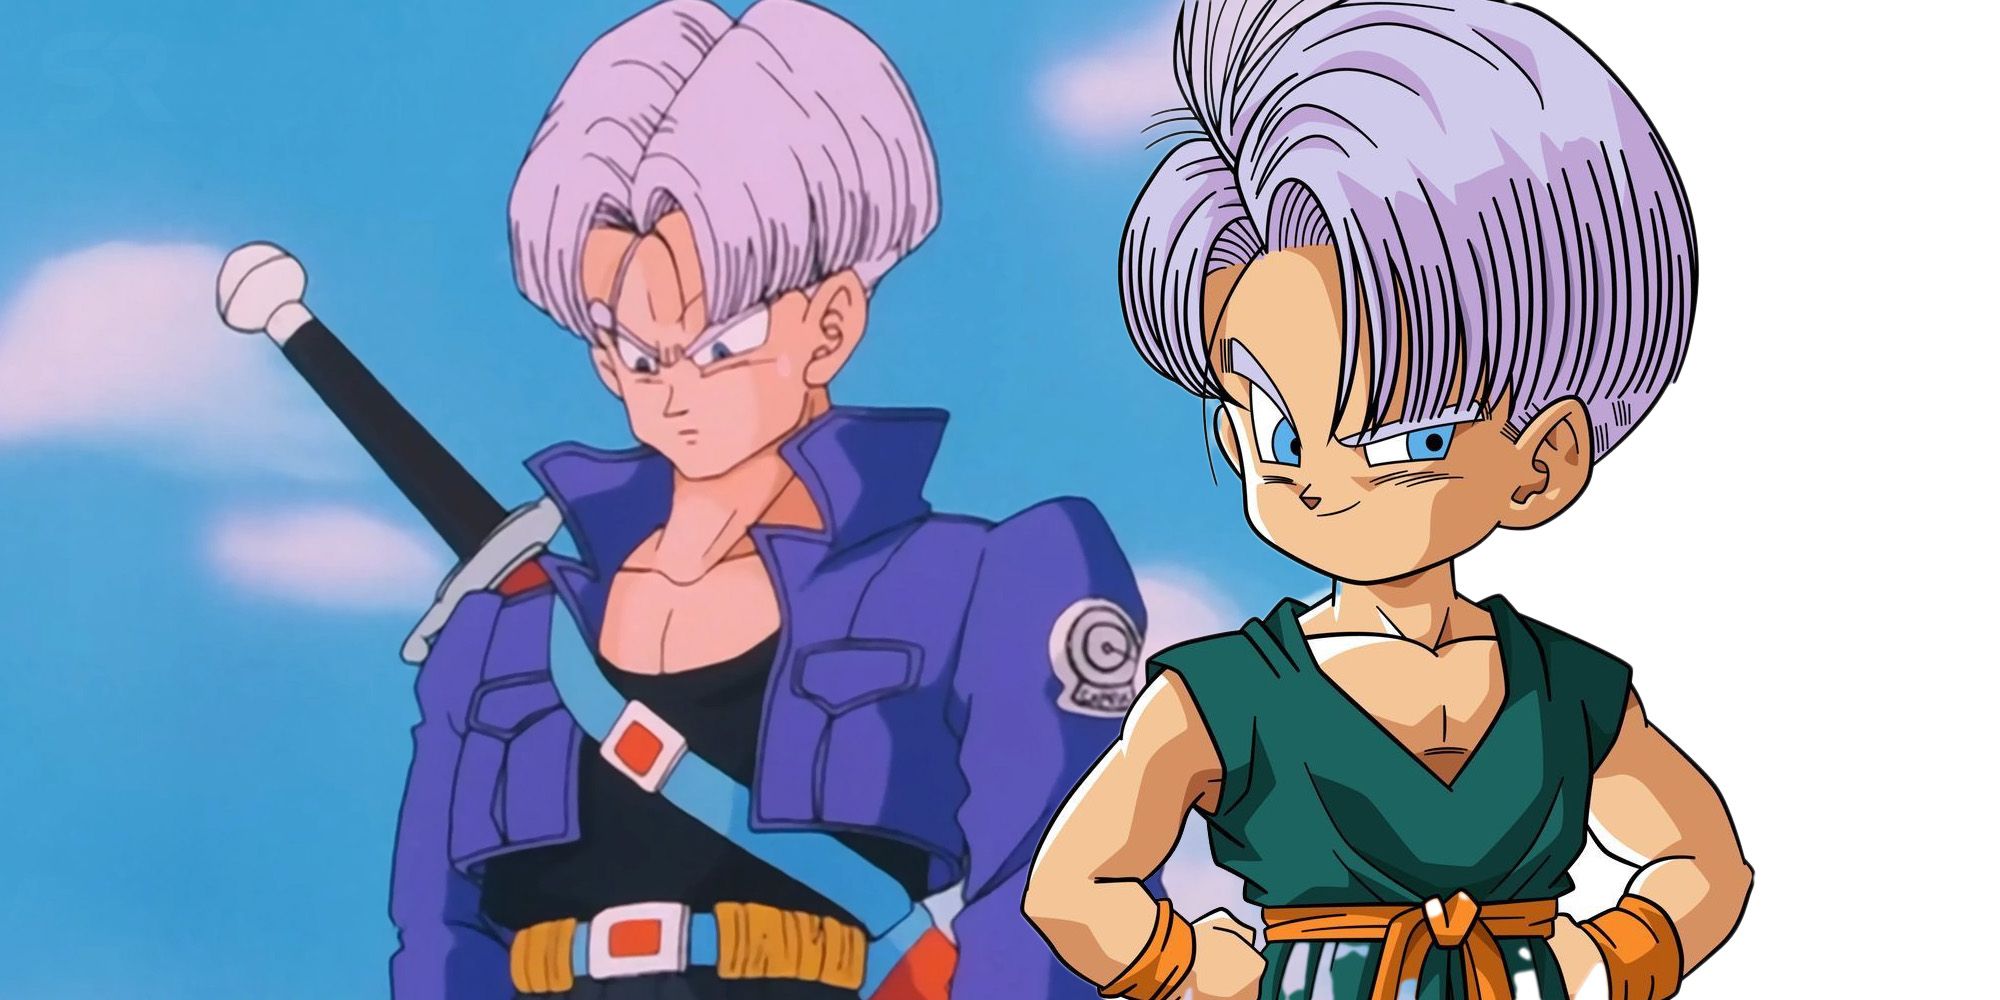 5 Things Kid Trunks Can Do That Future Trunks Can't (& 5 Things Future  Trunks Can Do That Kid Trunks Can't)